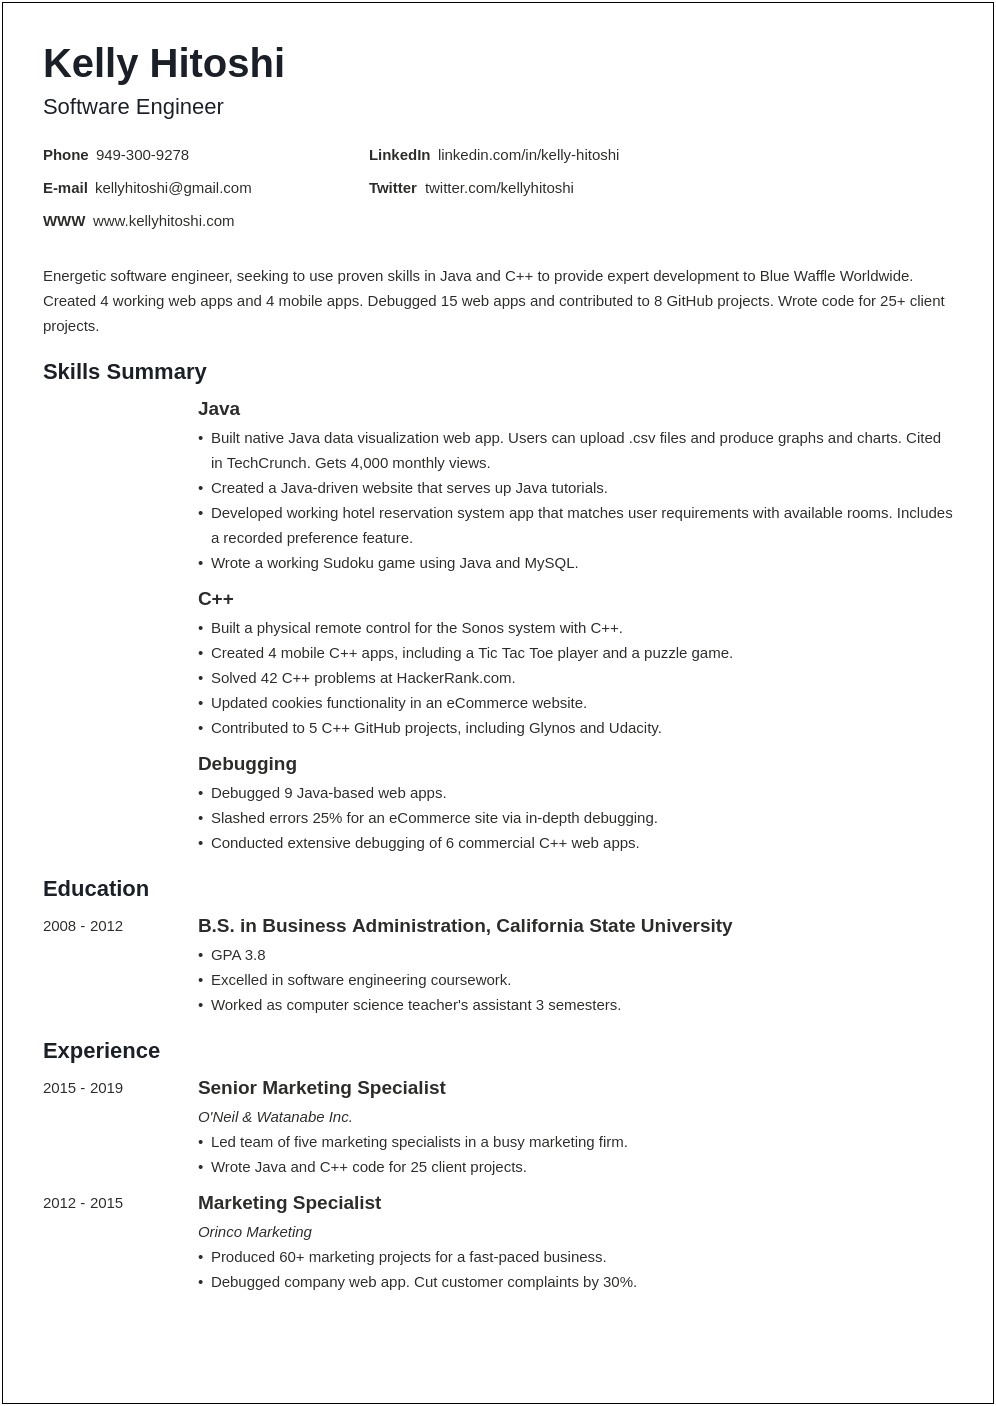 2019 Recent Resume Examples Career Changer